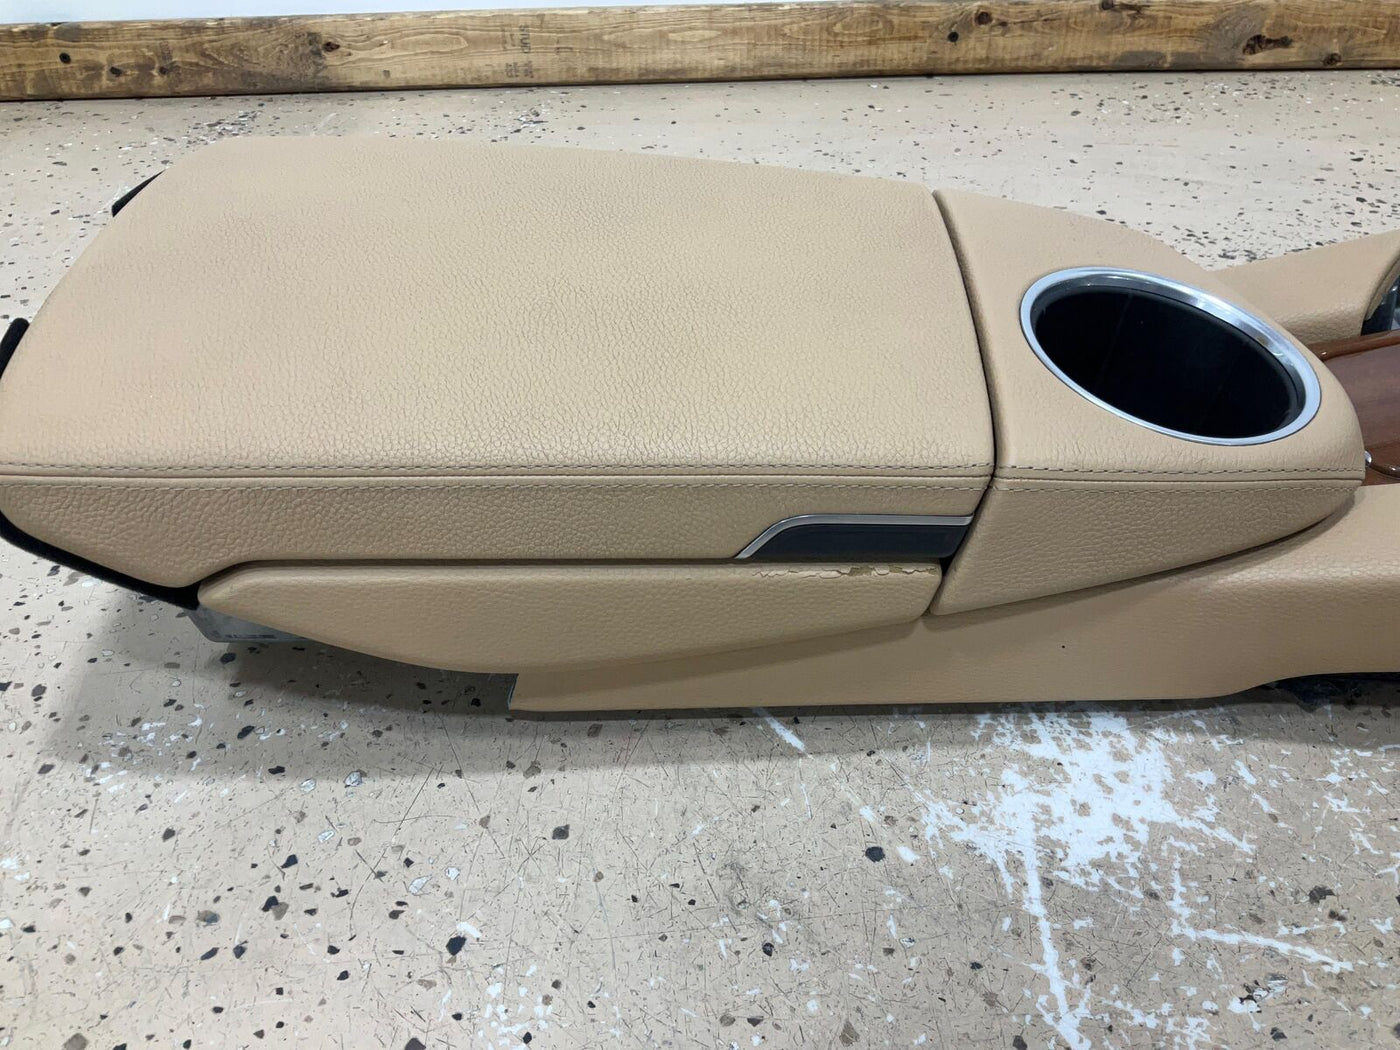 10-16 Porsche Panamera Bare Console W/ Lid OEM (Luxor Beige UB) See Notes